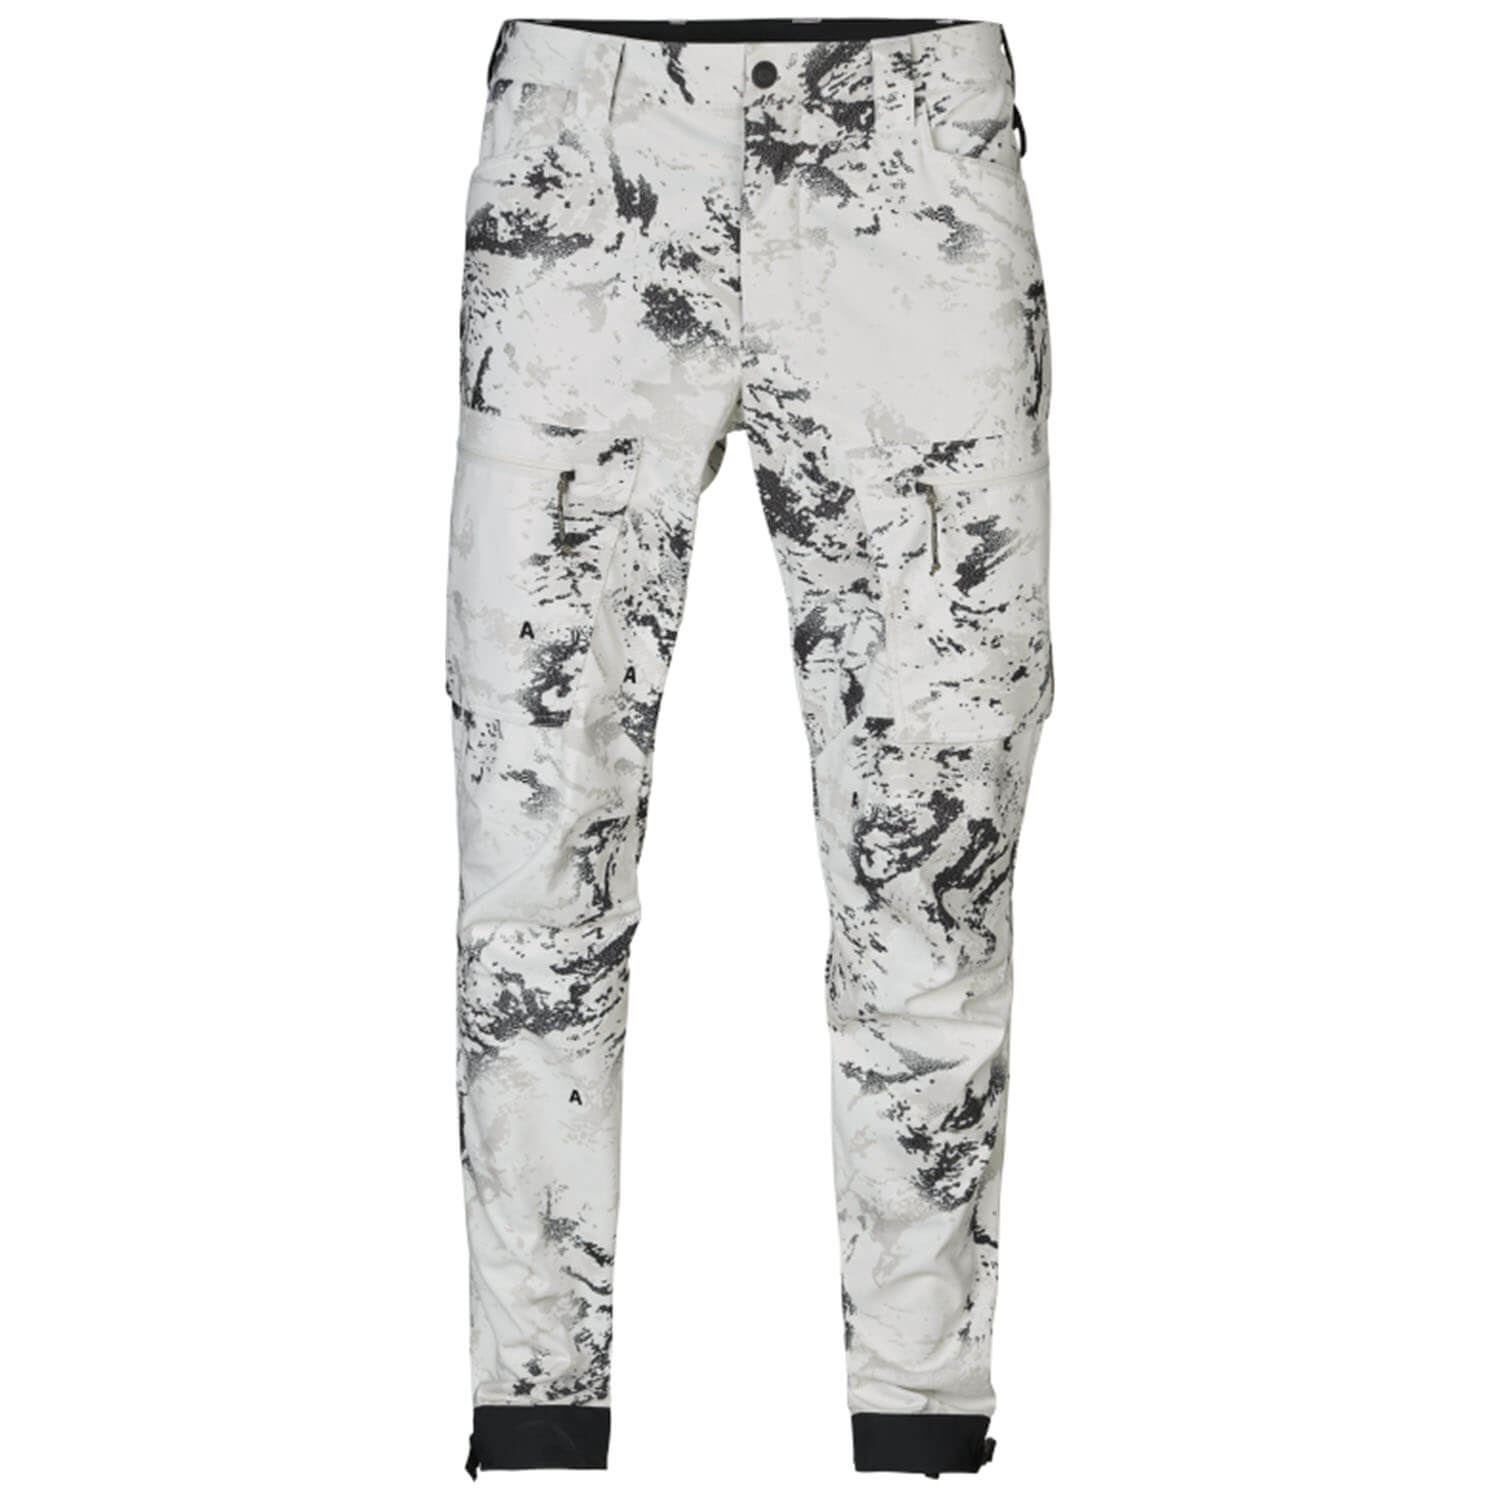 Härkila Trousers Winter Active WSP (AXIS MSP Snow) - Camouflage Trousers